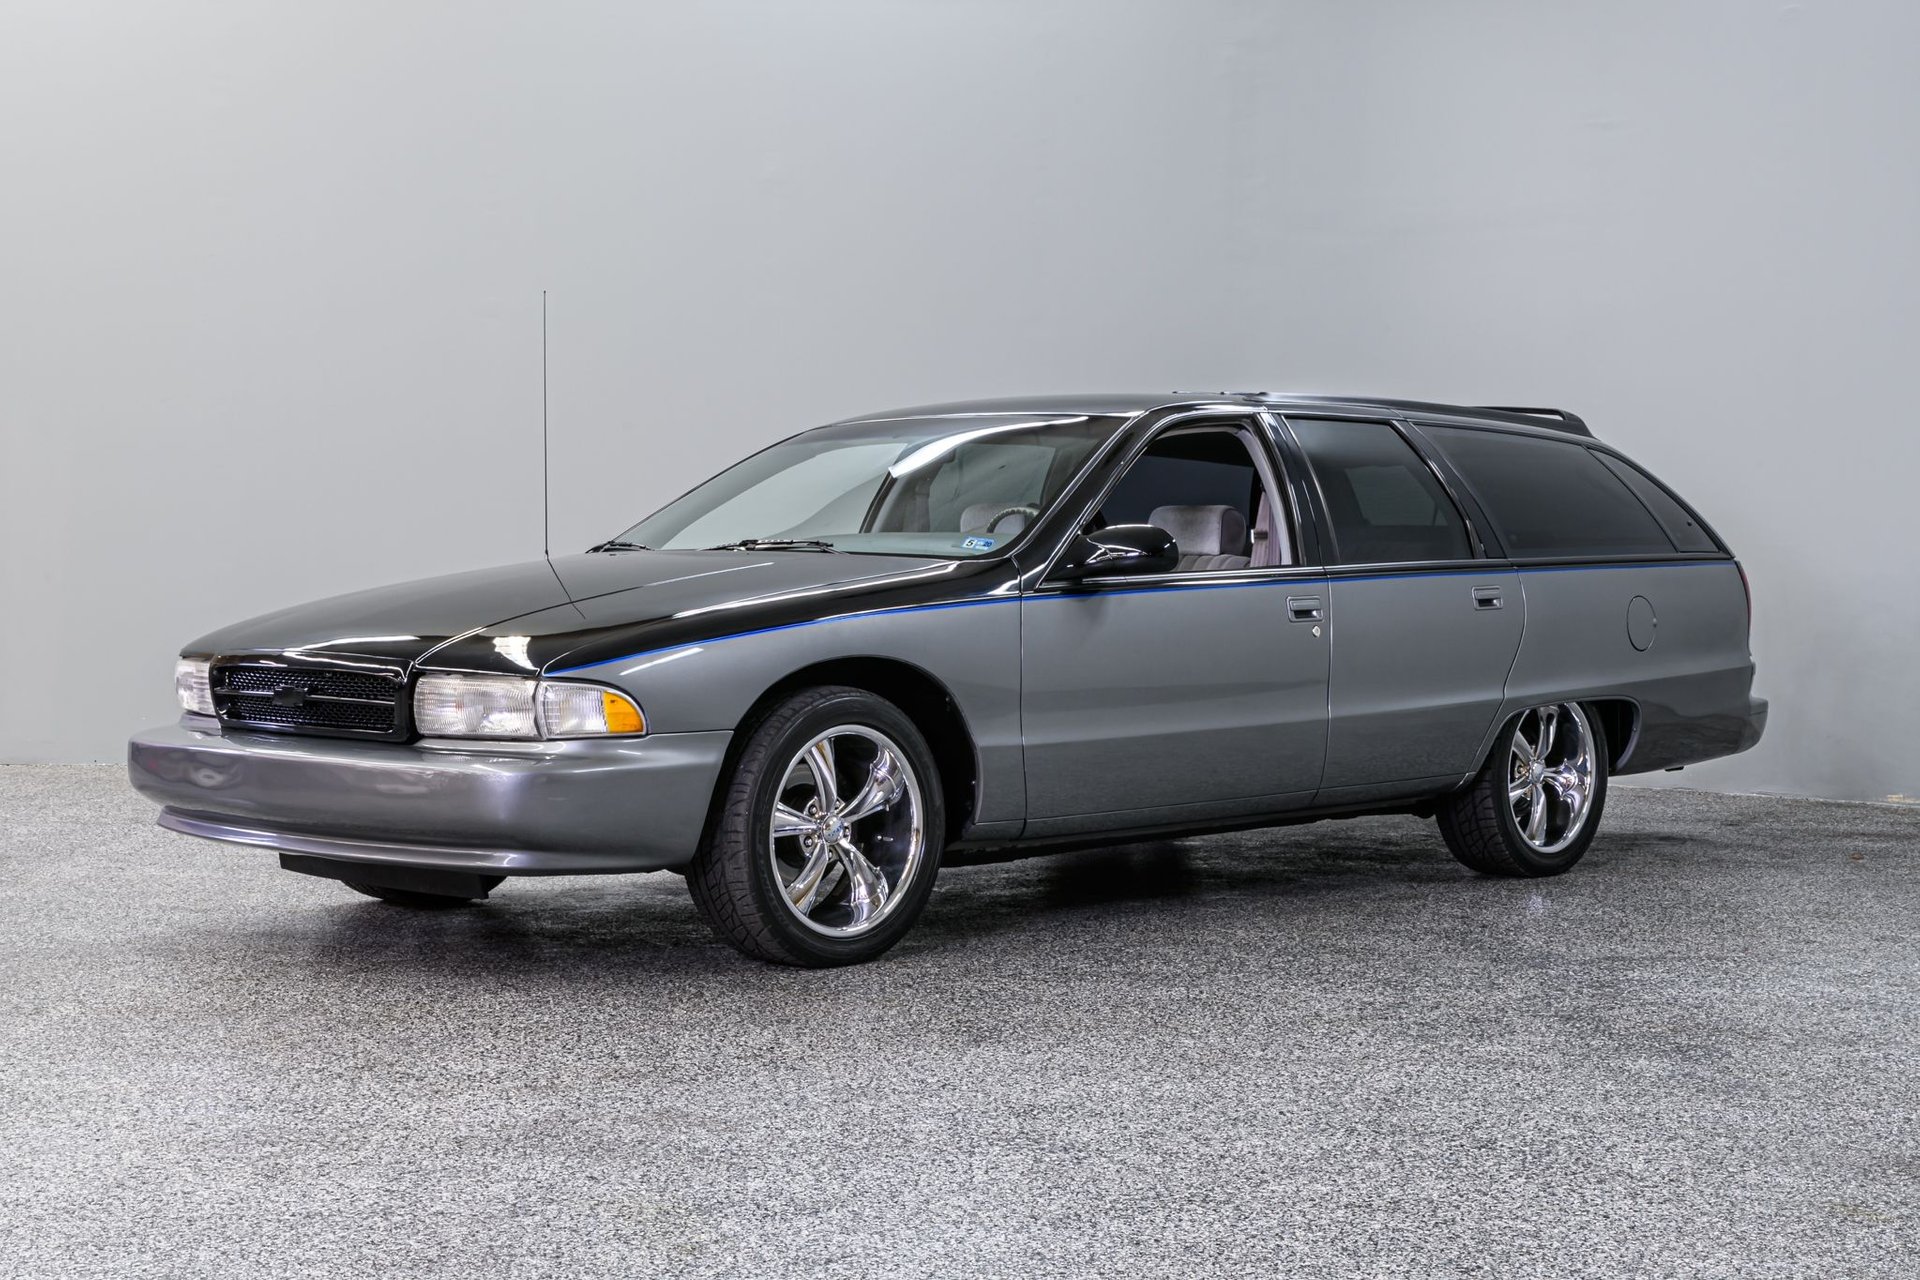 1992 Chevrolet Caprice Wagon for sale #186232 | Motorious